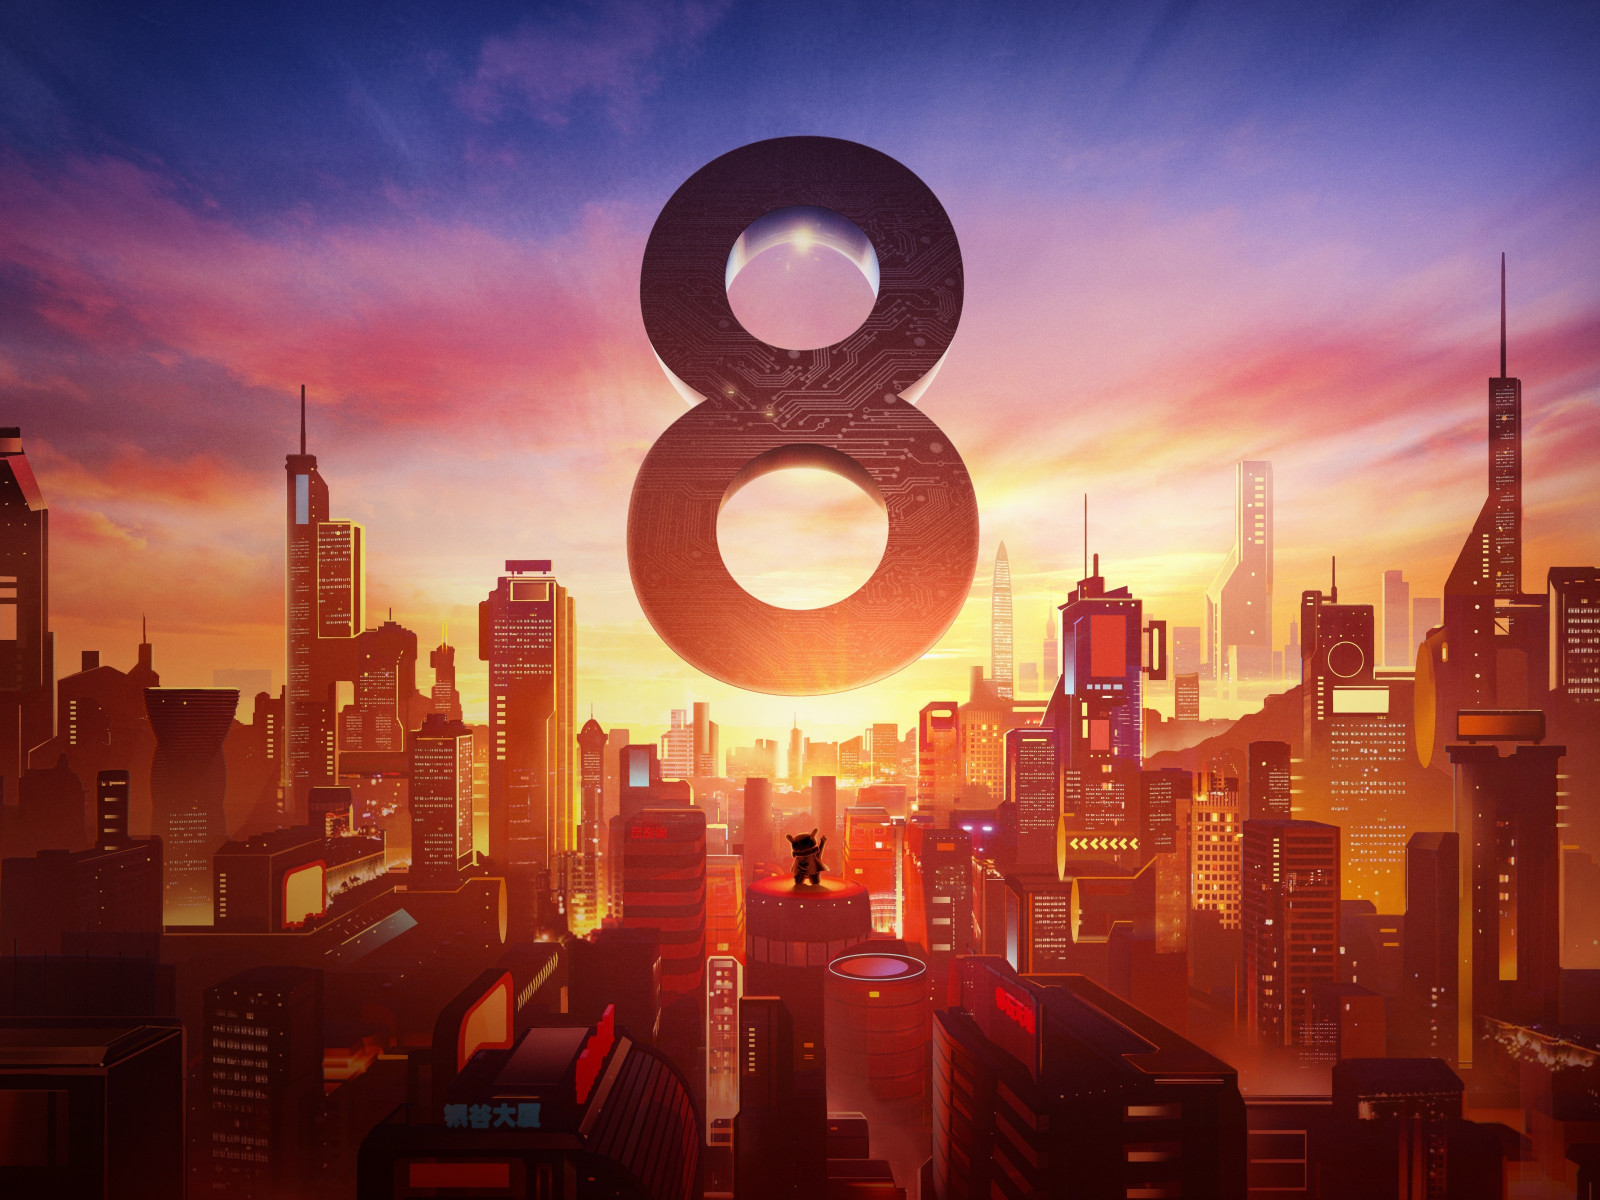 Xiaomi Mi 8. Poster from the launch event wallpaper 1600x1200